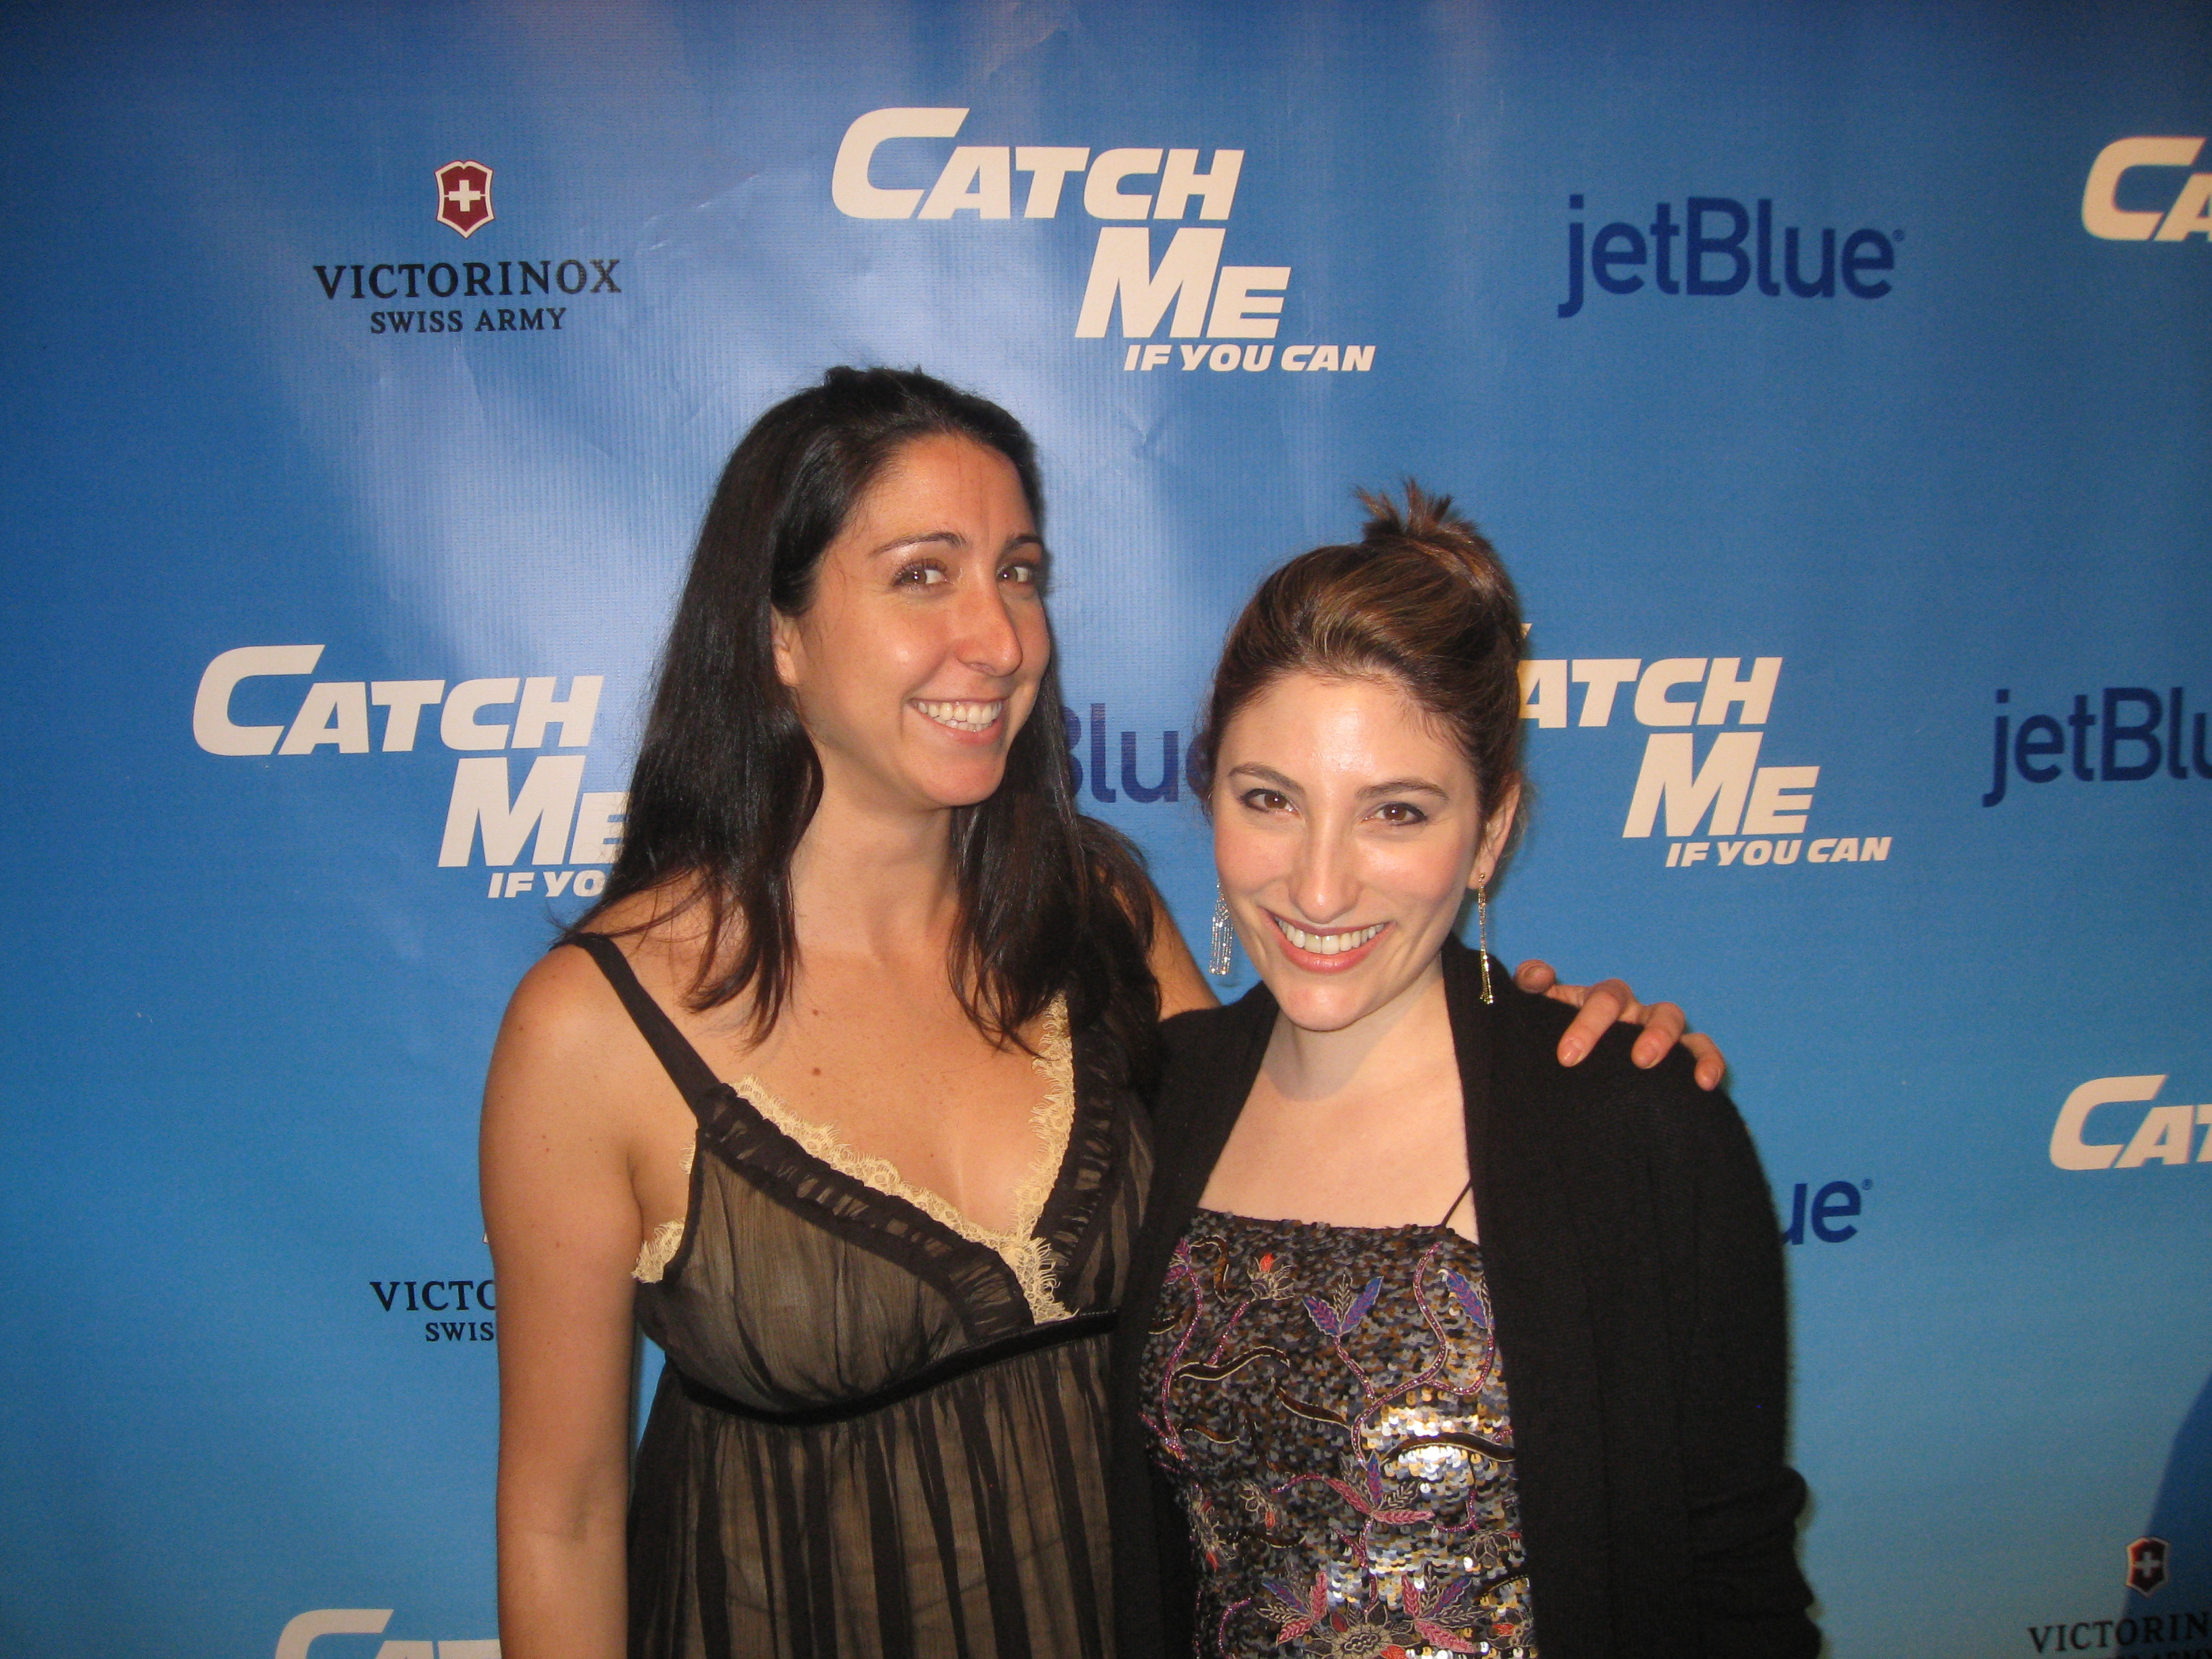 Opening night of CATCH ME IF YOU CAN with Eleni Delopoulos.